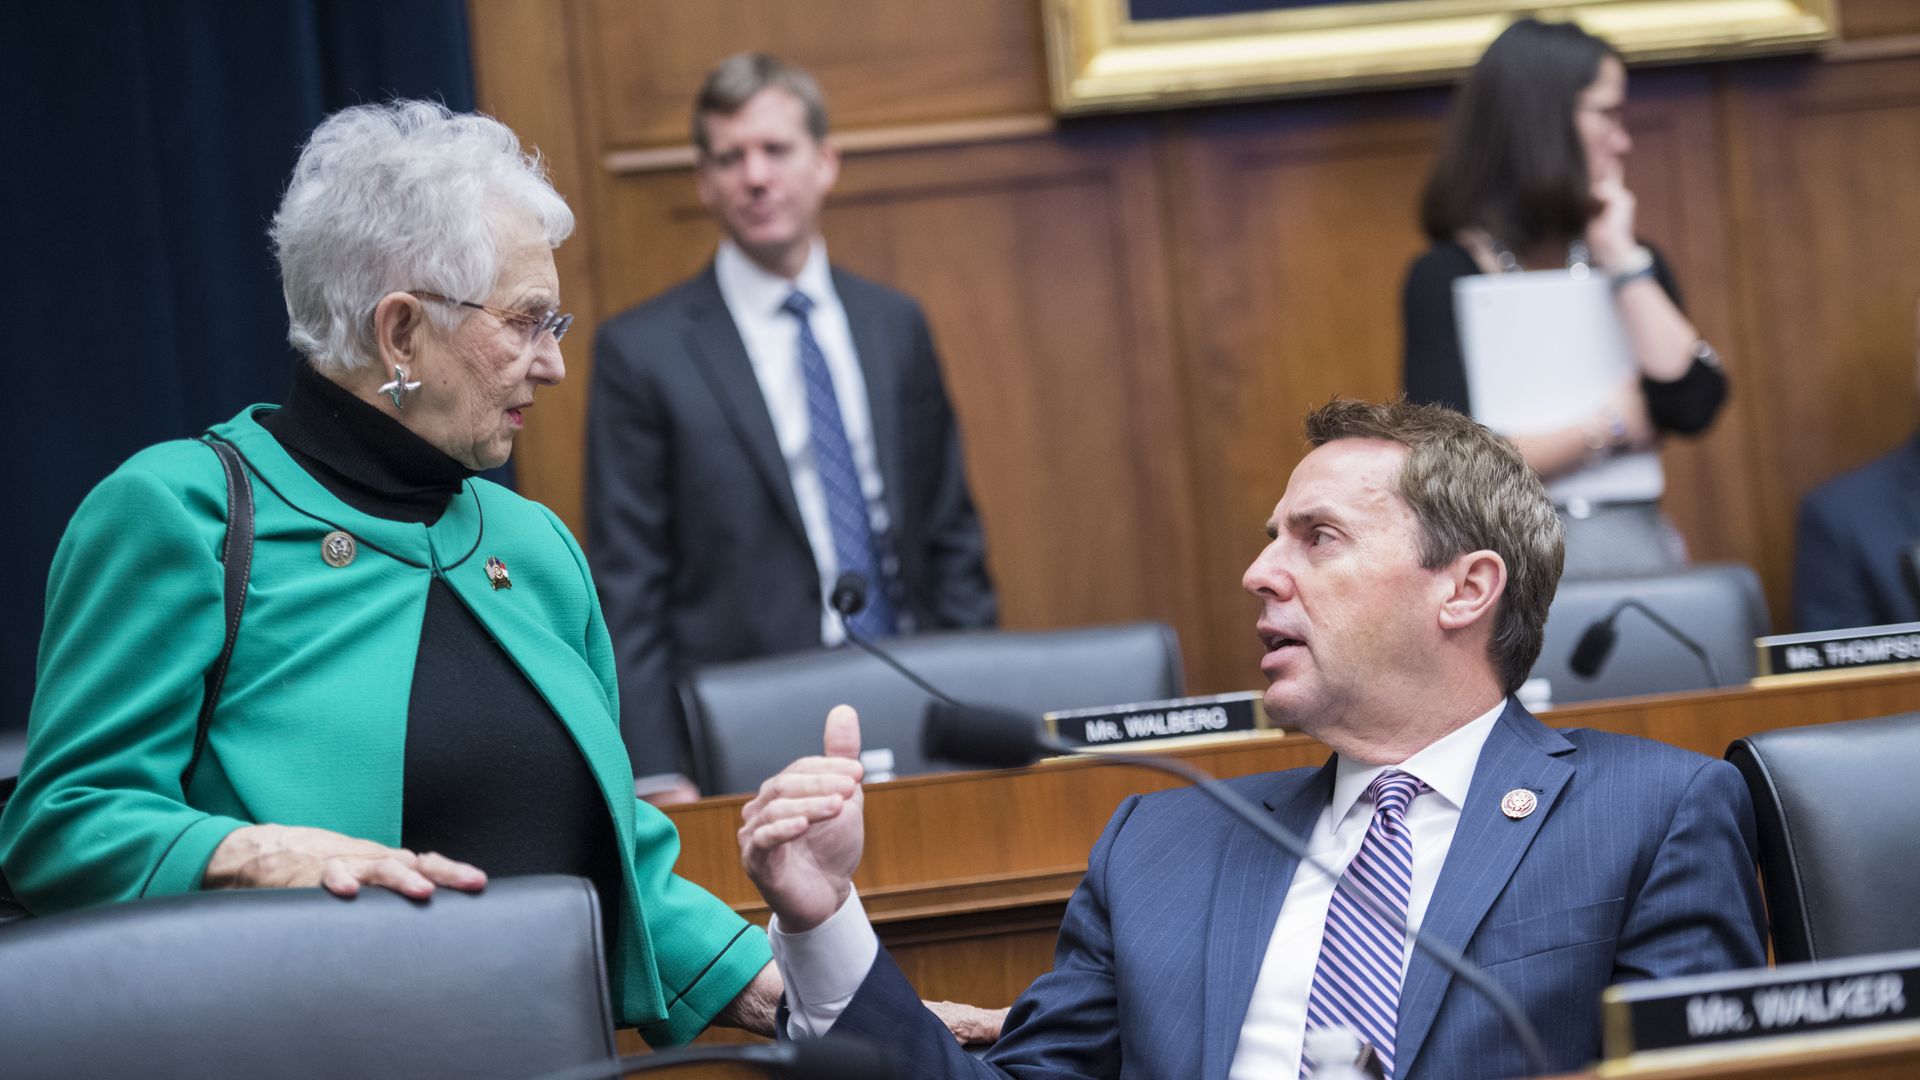 Ranking member Rep. Virginia Foxx, R-N.C., and Rep. Mark Walker, R-N.C., are seen during a House Education and Labor Committee business meeting in Rayburn Building on Tuesday, January 29, 2019. (Photo By Tom Williams/CQ Roll Call)